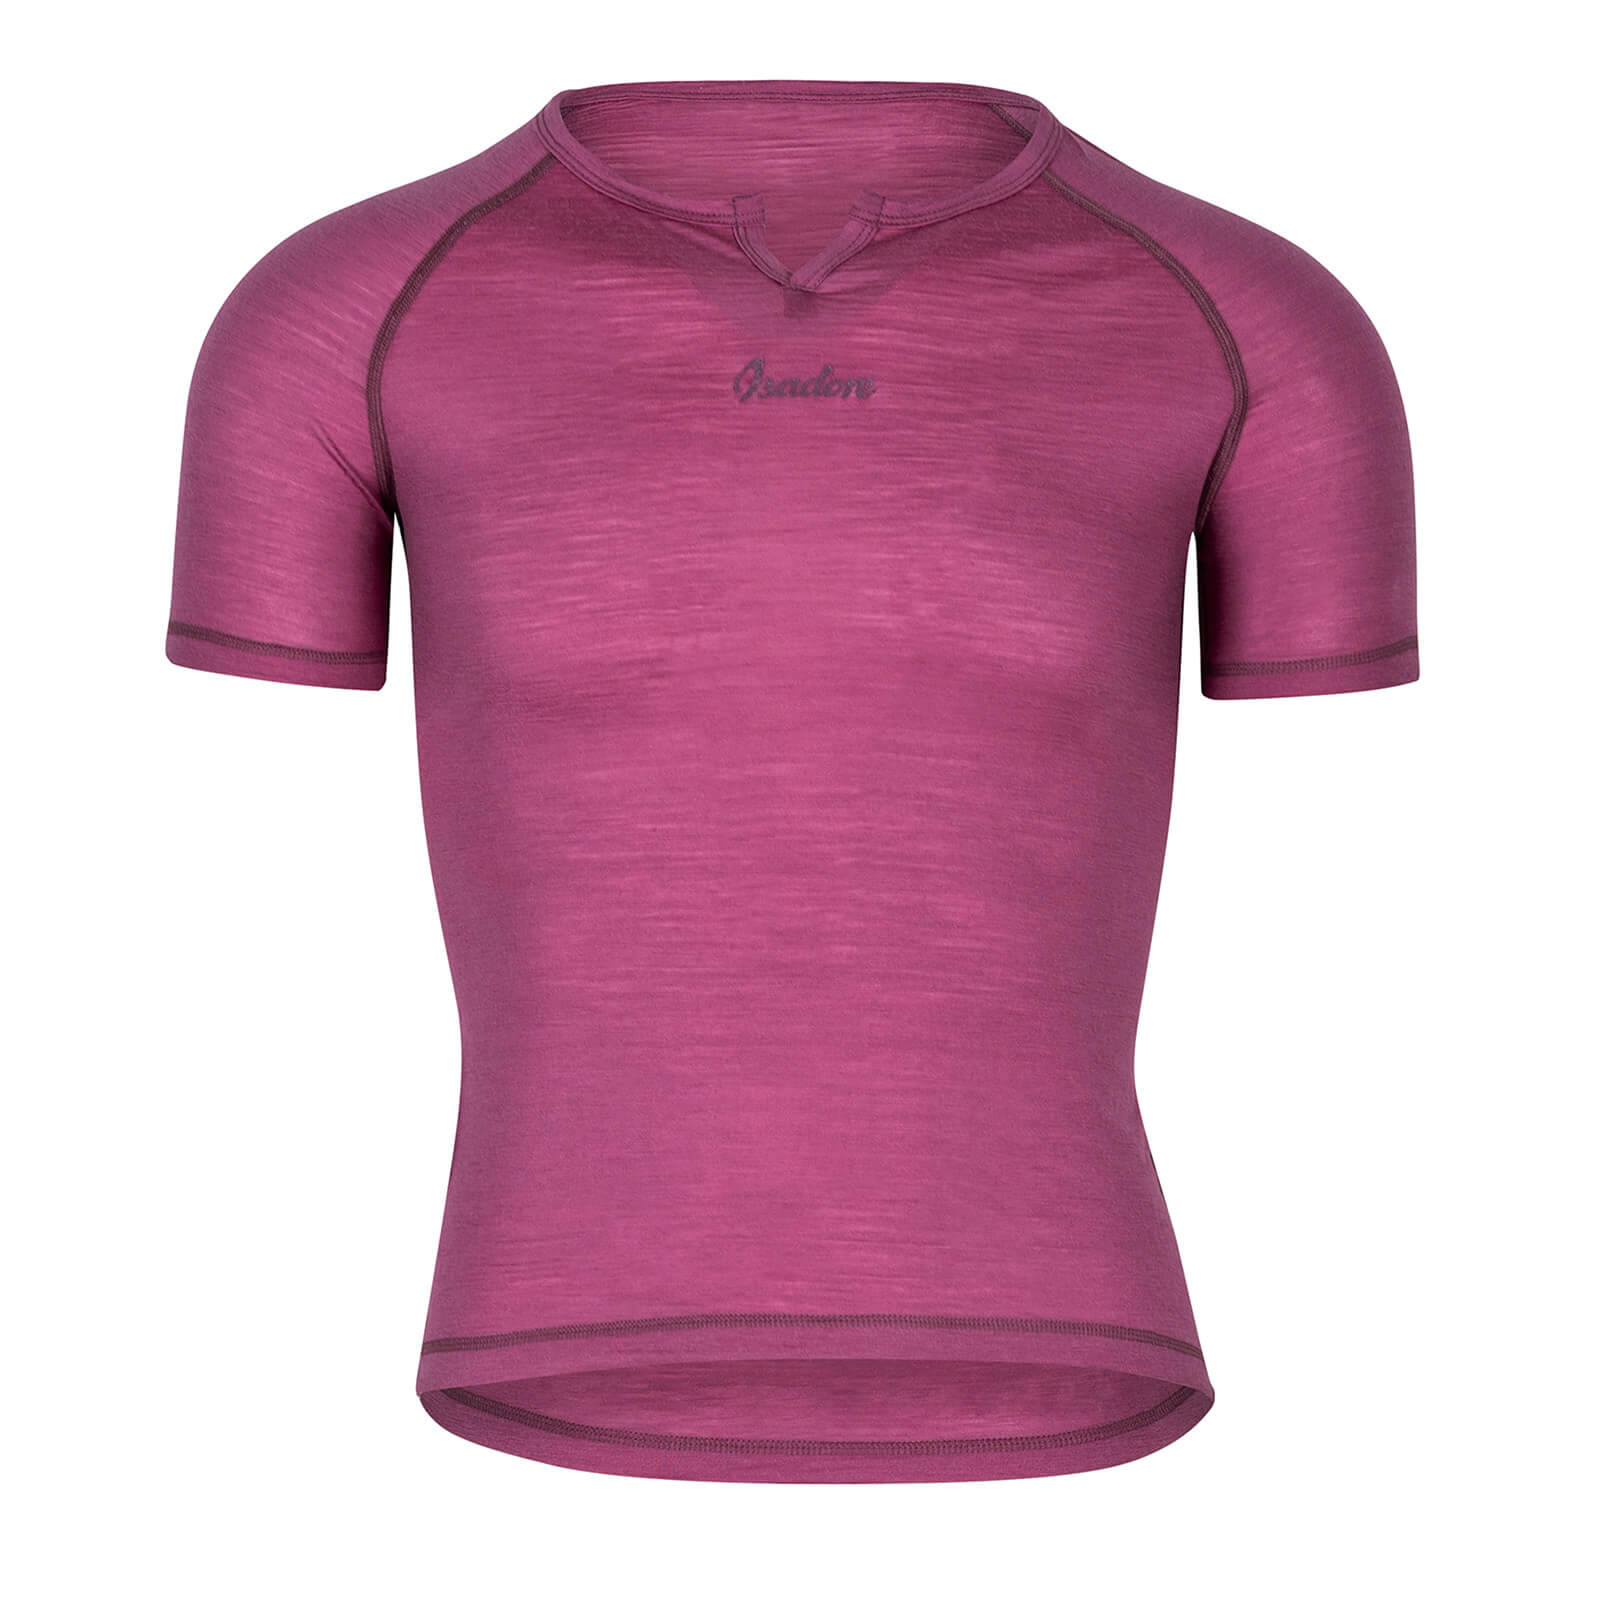 Isadore Merino Short Sleeve Baselayer  - L - Crushed Berry